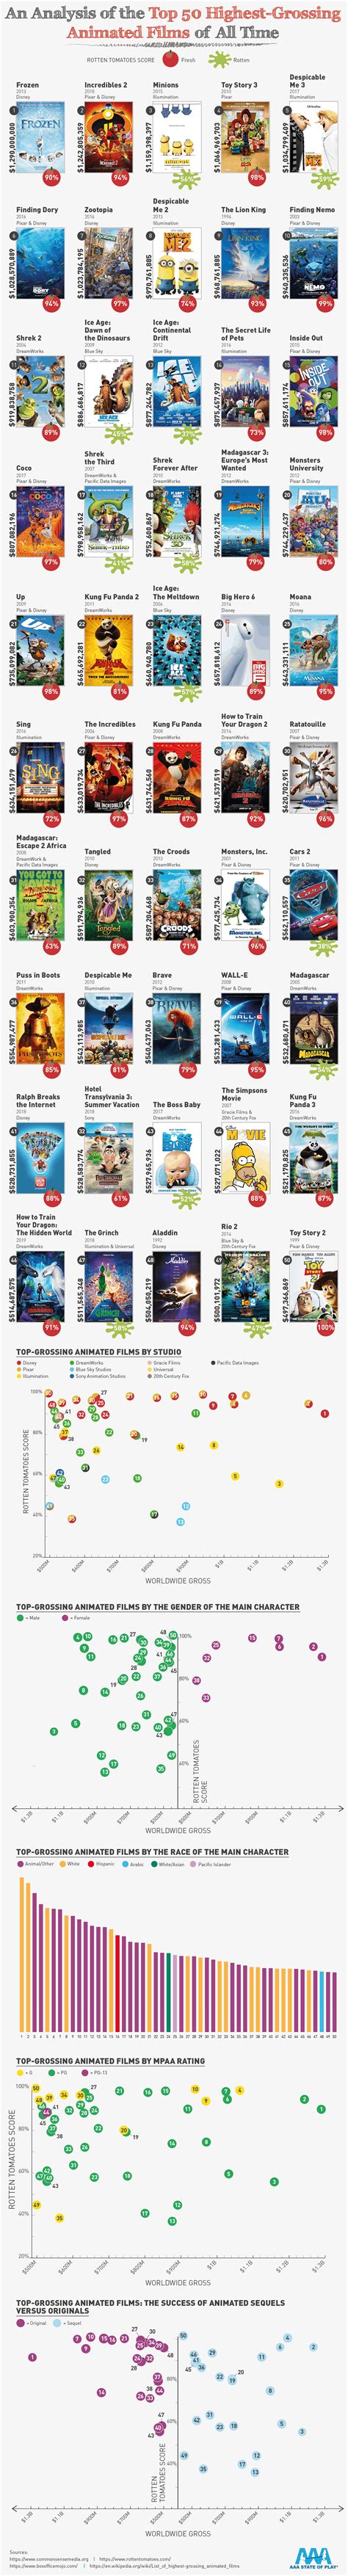 And the best animated movie of all time is. The Top 50 Animated Movies Of All Time | Daily Infographic